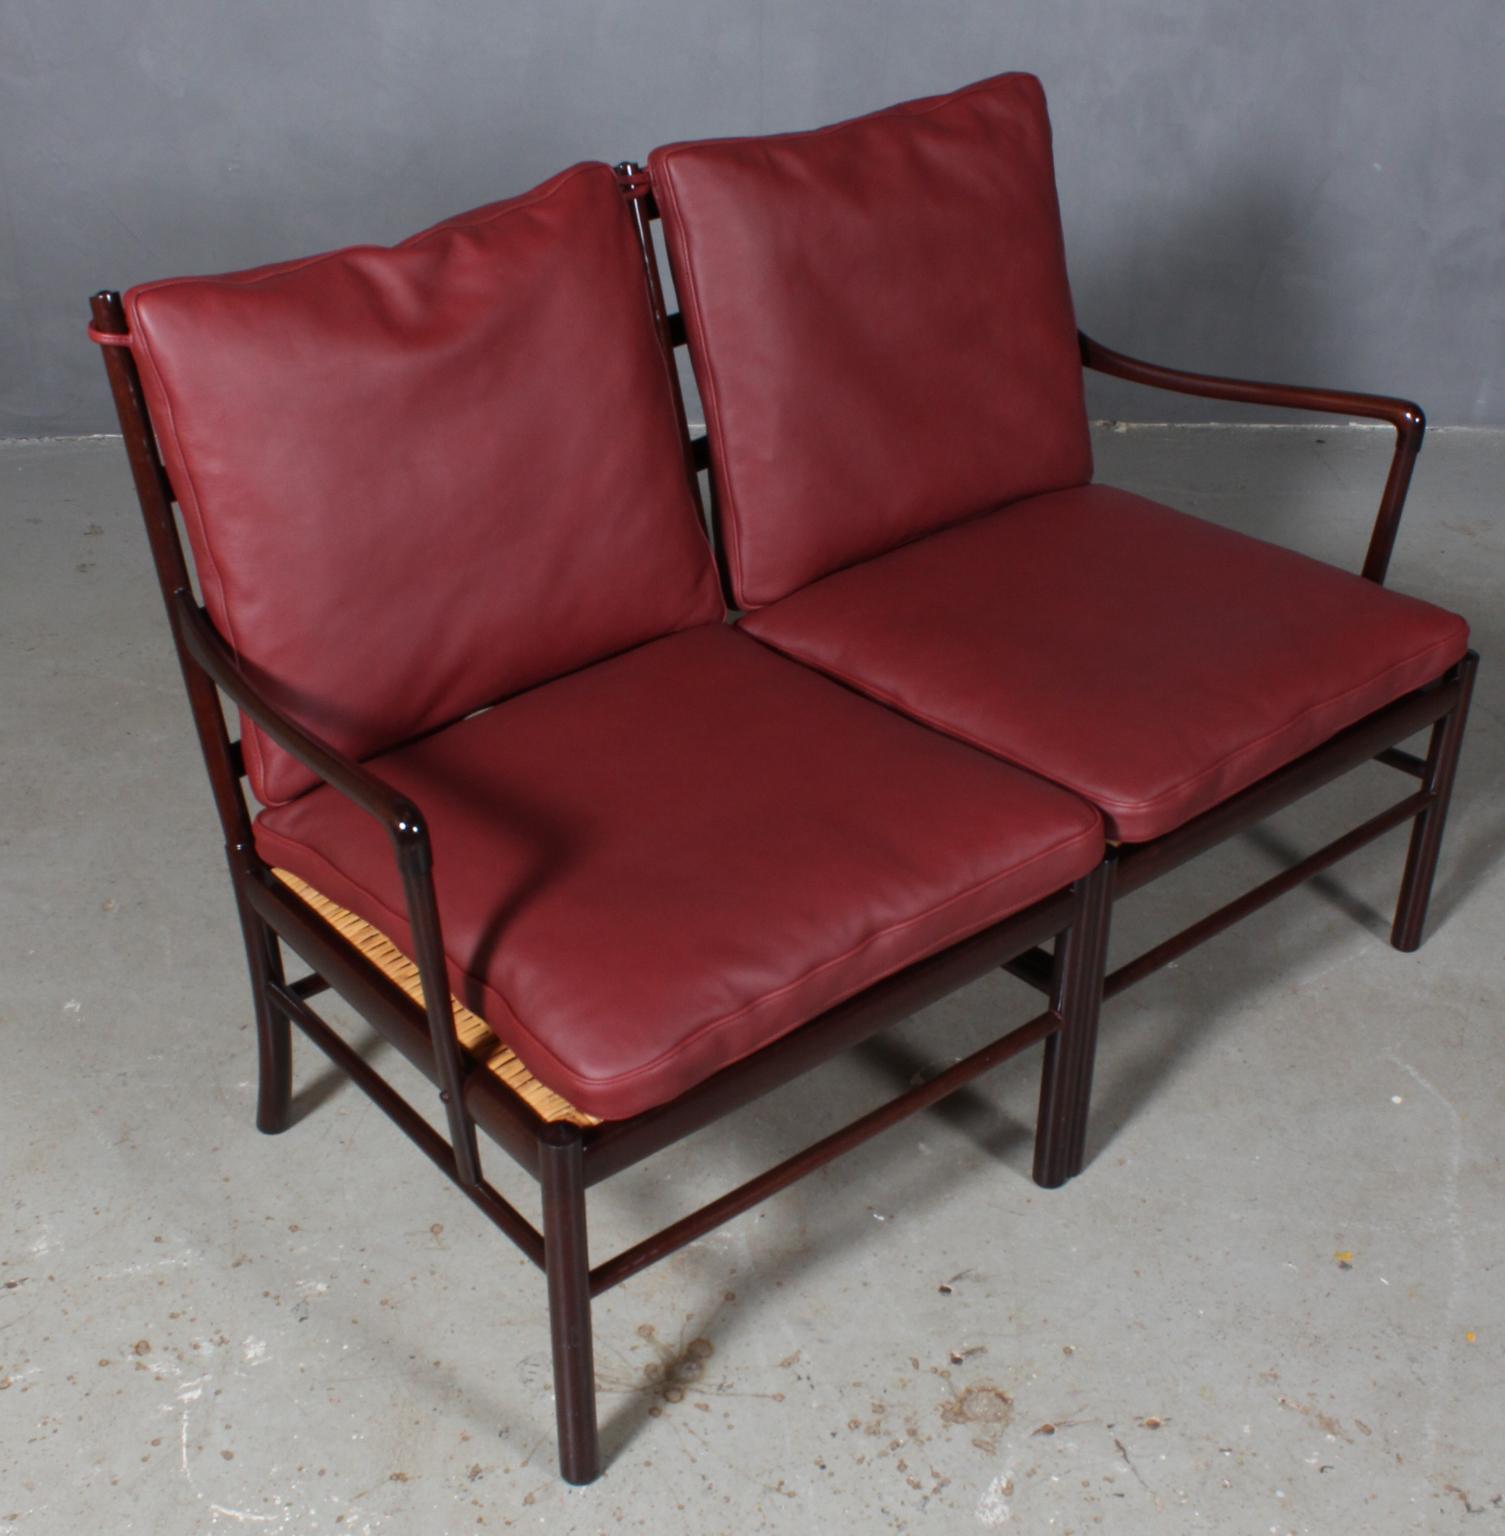 Ole Wanscher colonial sofa new upholstered with Indian red elegance aniline leather.

Made in mahogany. 

Model PJ 149 colonial chair, made by Poul Jeppesen.